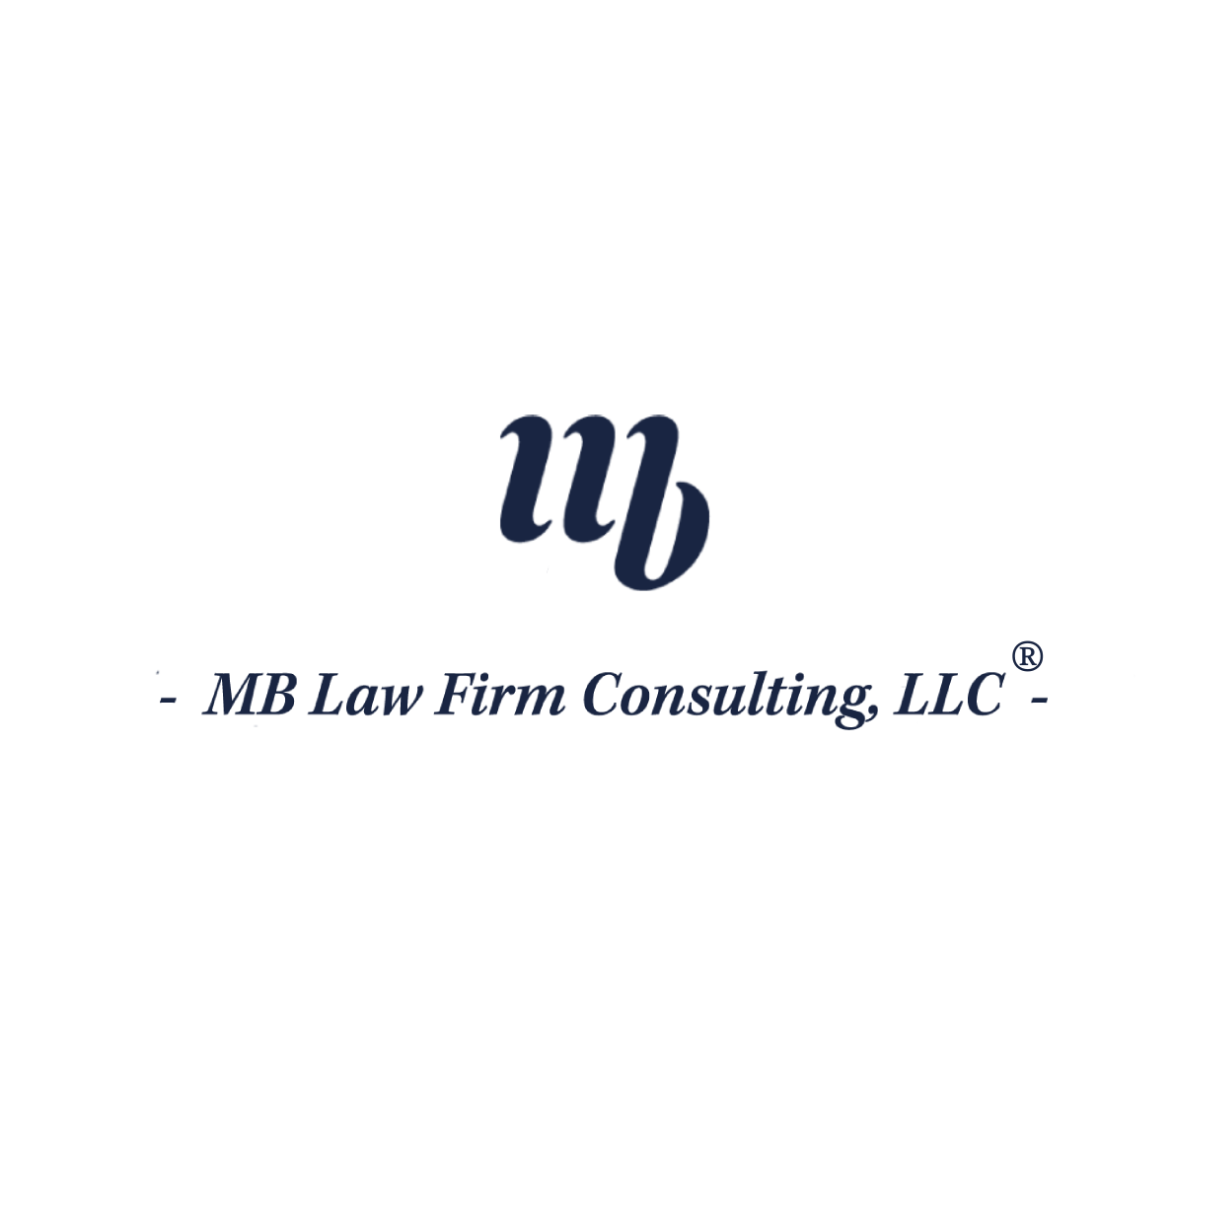 MB Law Firm Consulting LLC